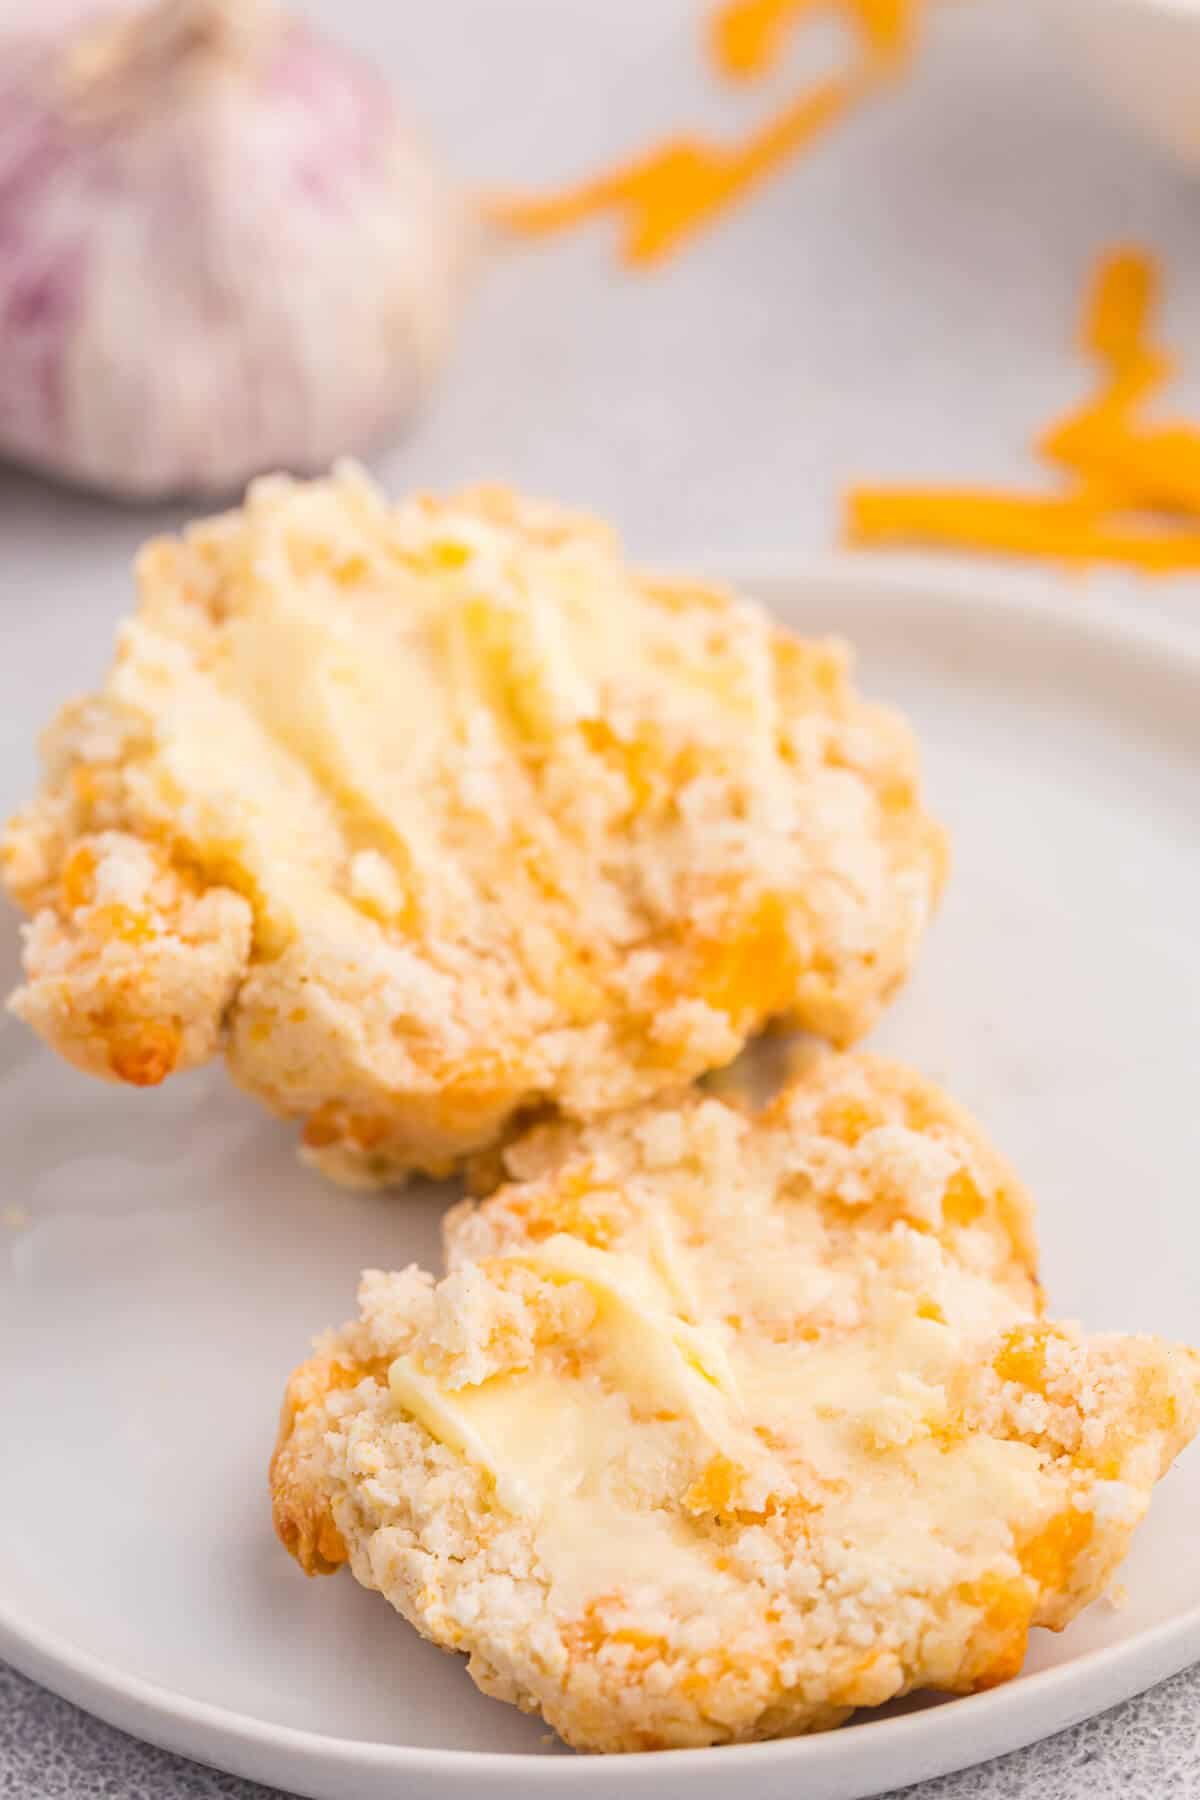 A cheesy garlic biscuit cut in half with butter on it.